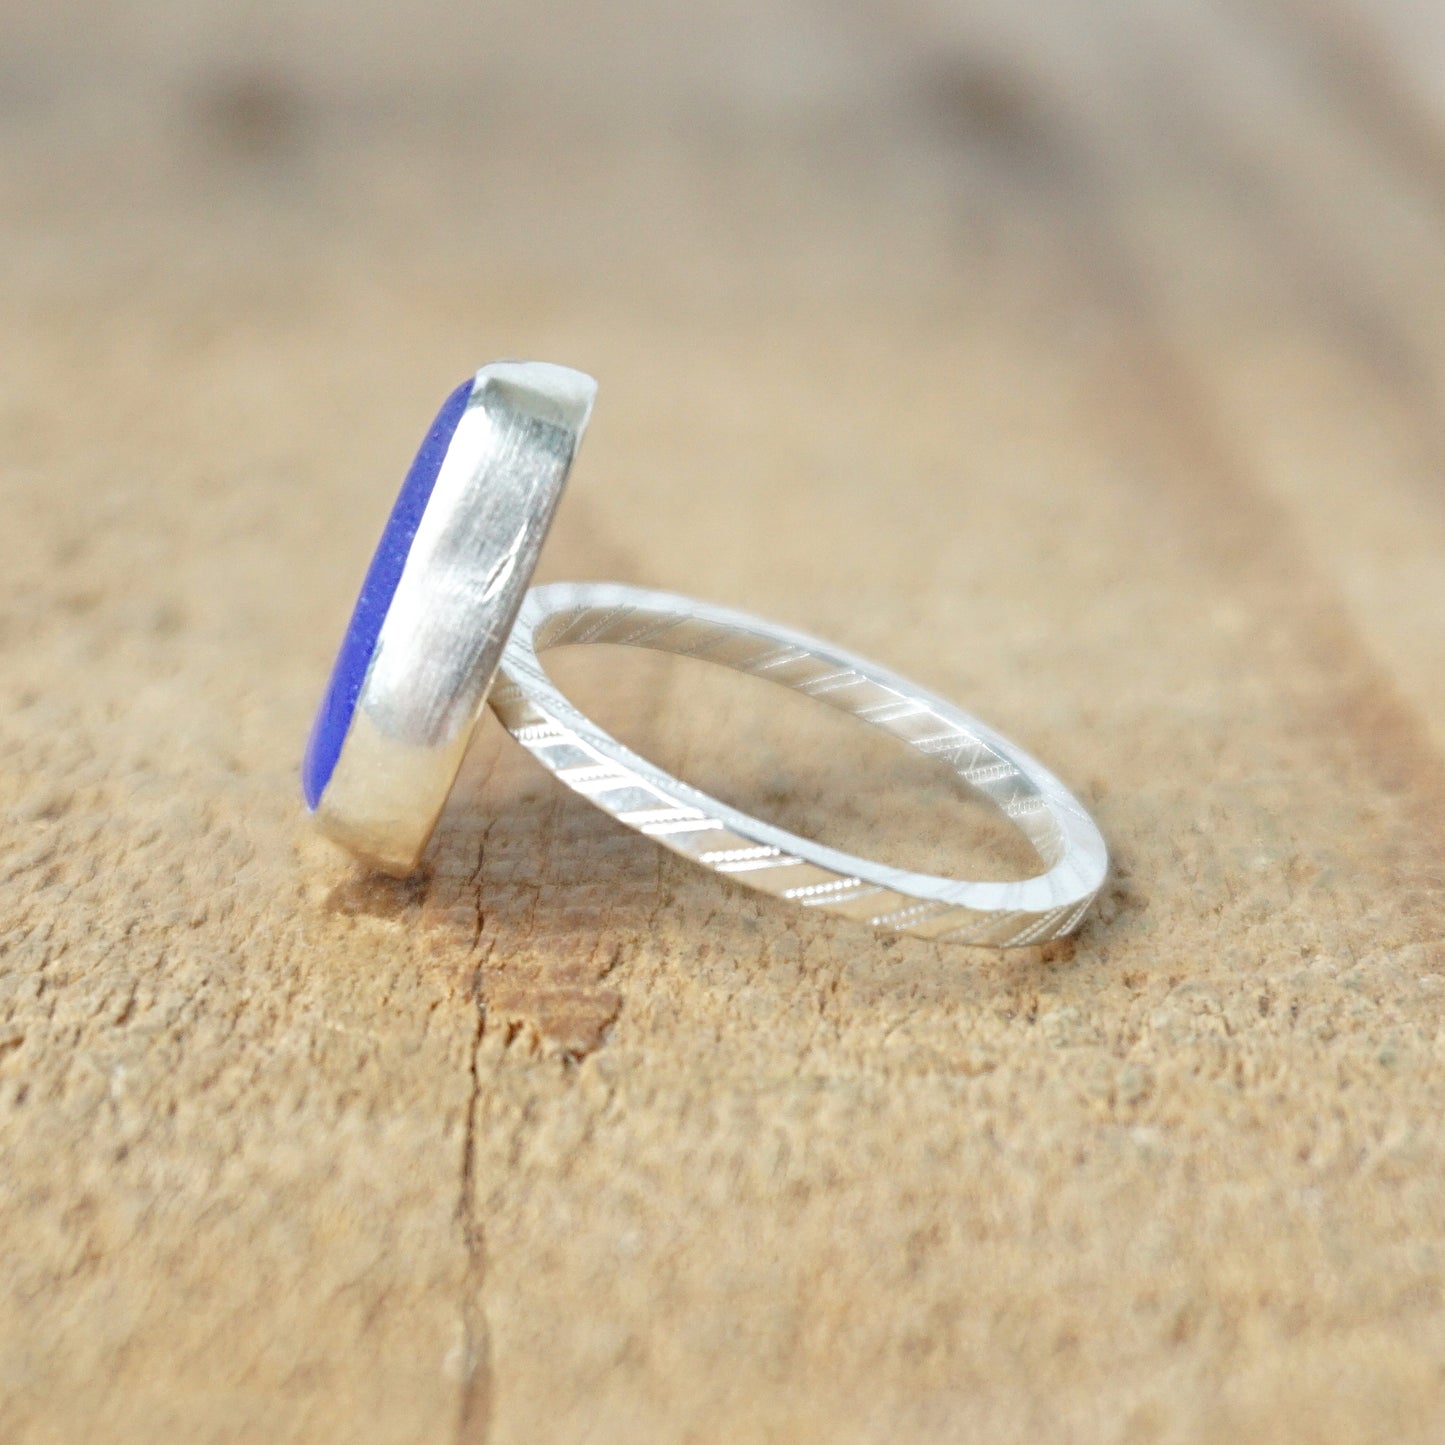 Size 8 Cornflower Blue Sea Glass Stacking Ring